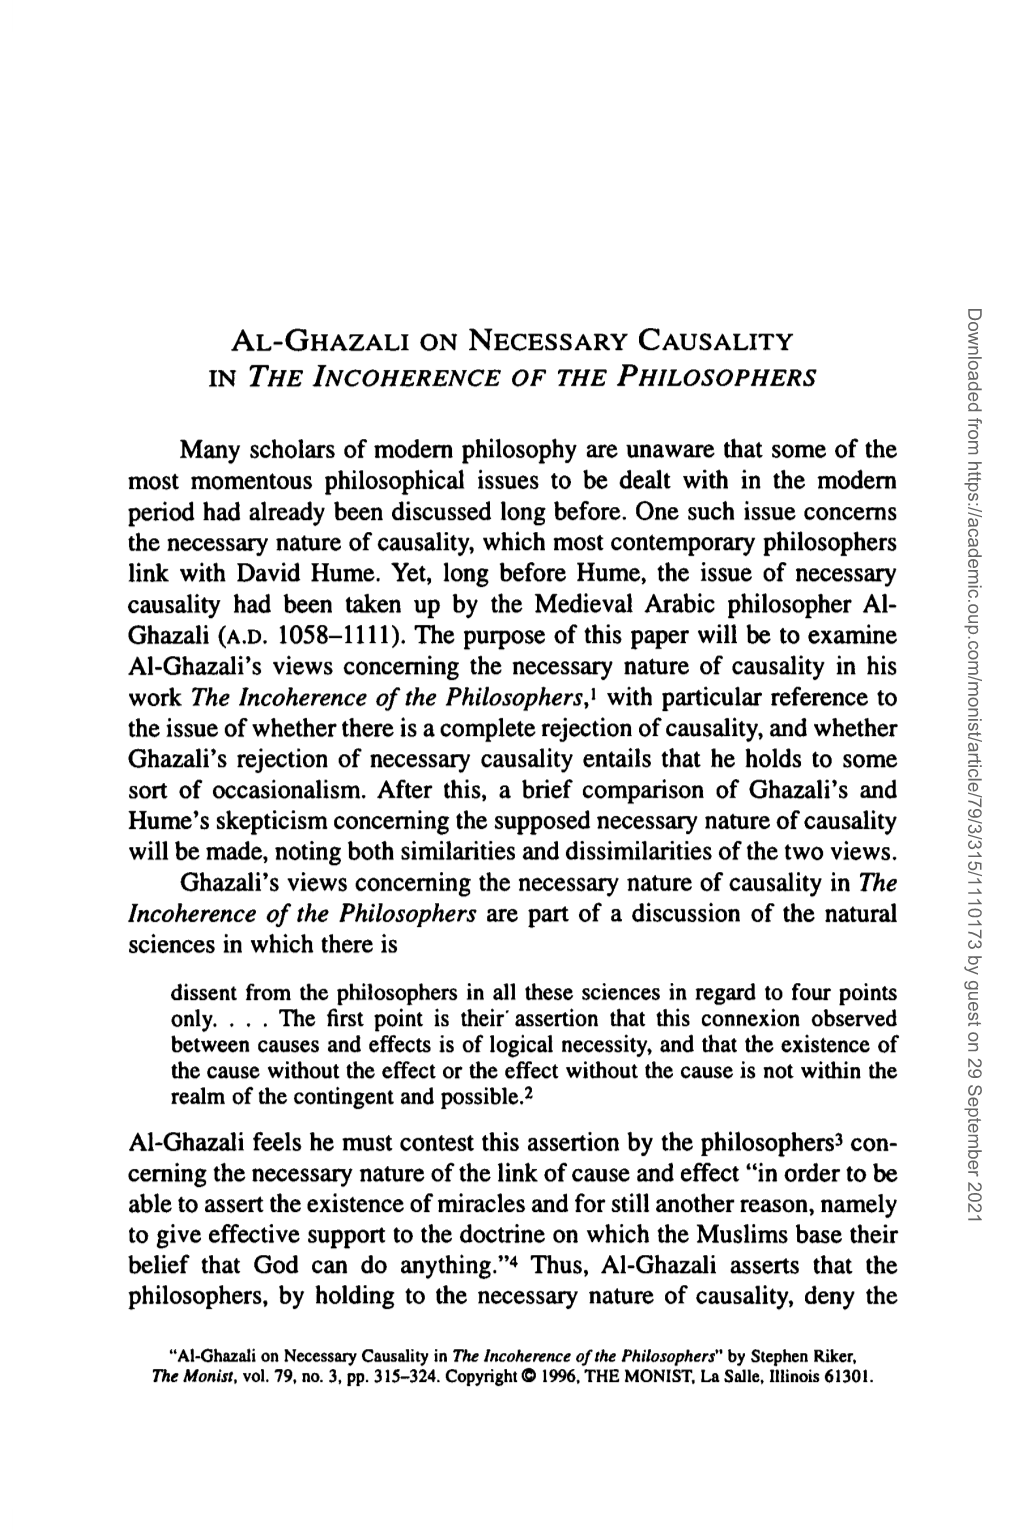 AL-GHAZALI on NECESSARY CAUSALITY in the INCOHERENCE of the PHILOSOPHERS Many Scholars of Modern Philosophy Are Unaware That